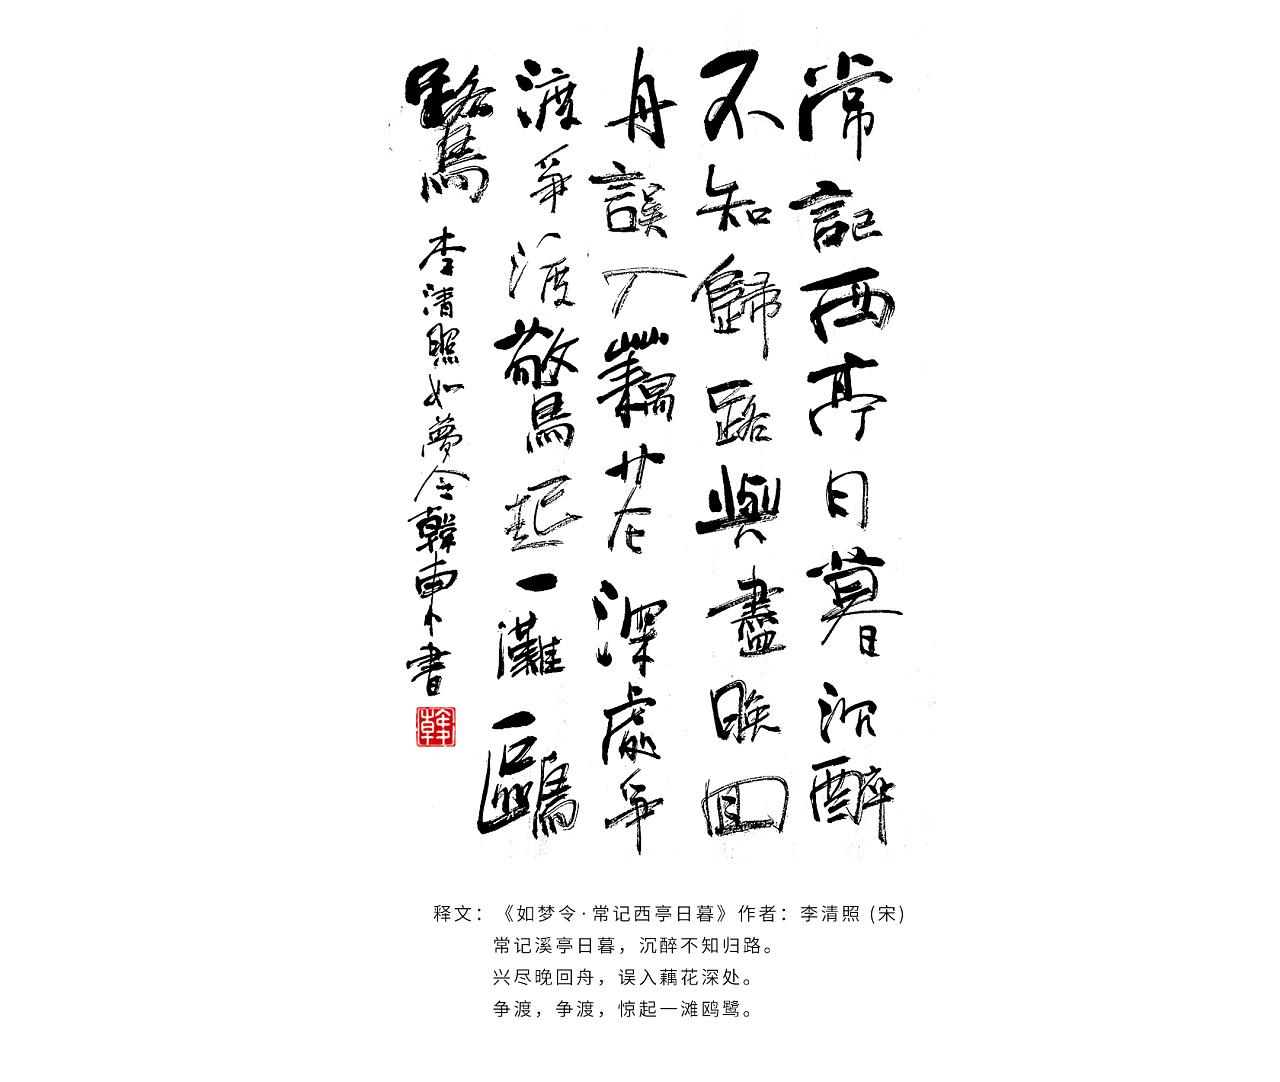 Chinese Creative Font Design-As long as there are people who want to see, they are not alone